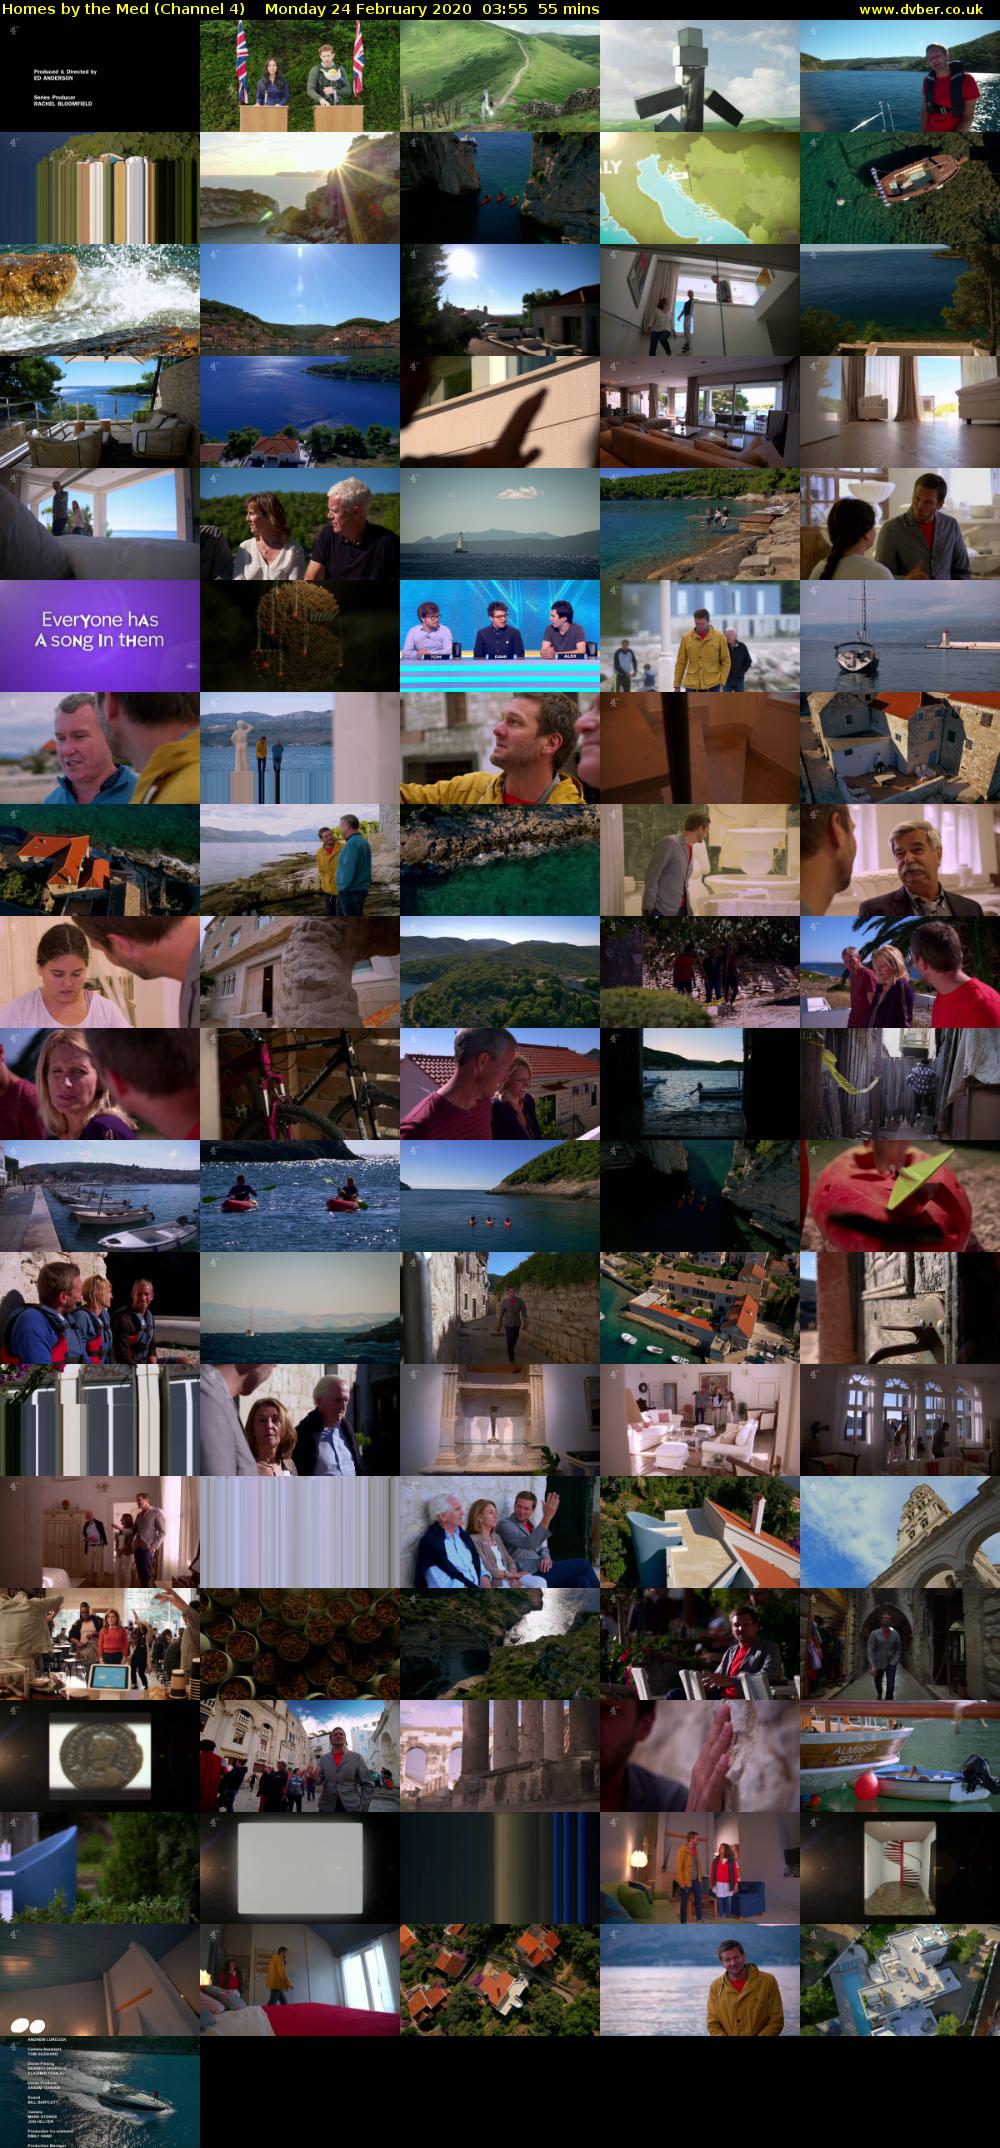 Homes by the Med (Channel 4) Monday 24 February 2020 03:55 - 04:50